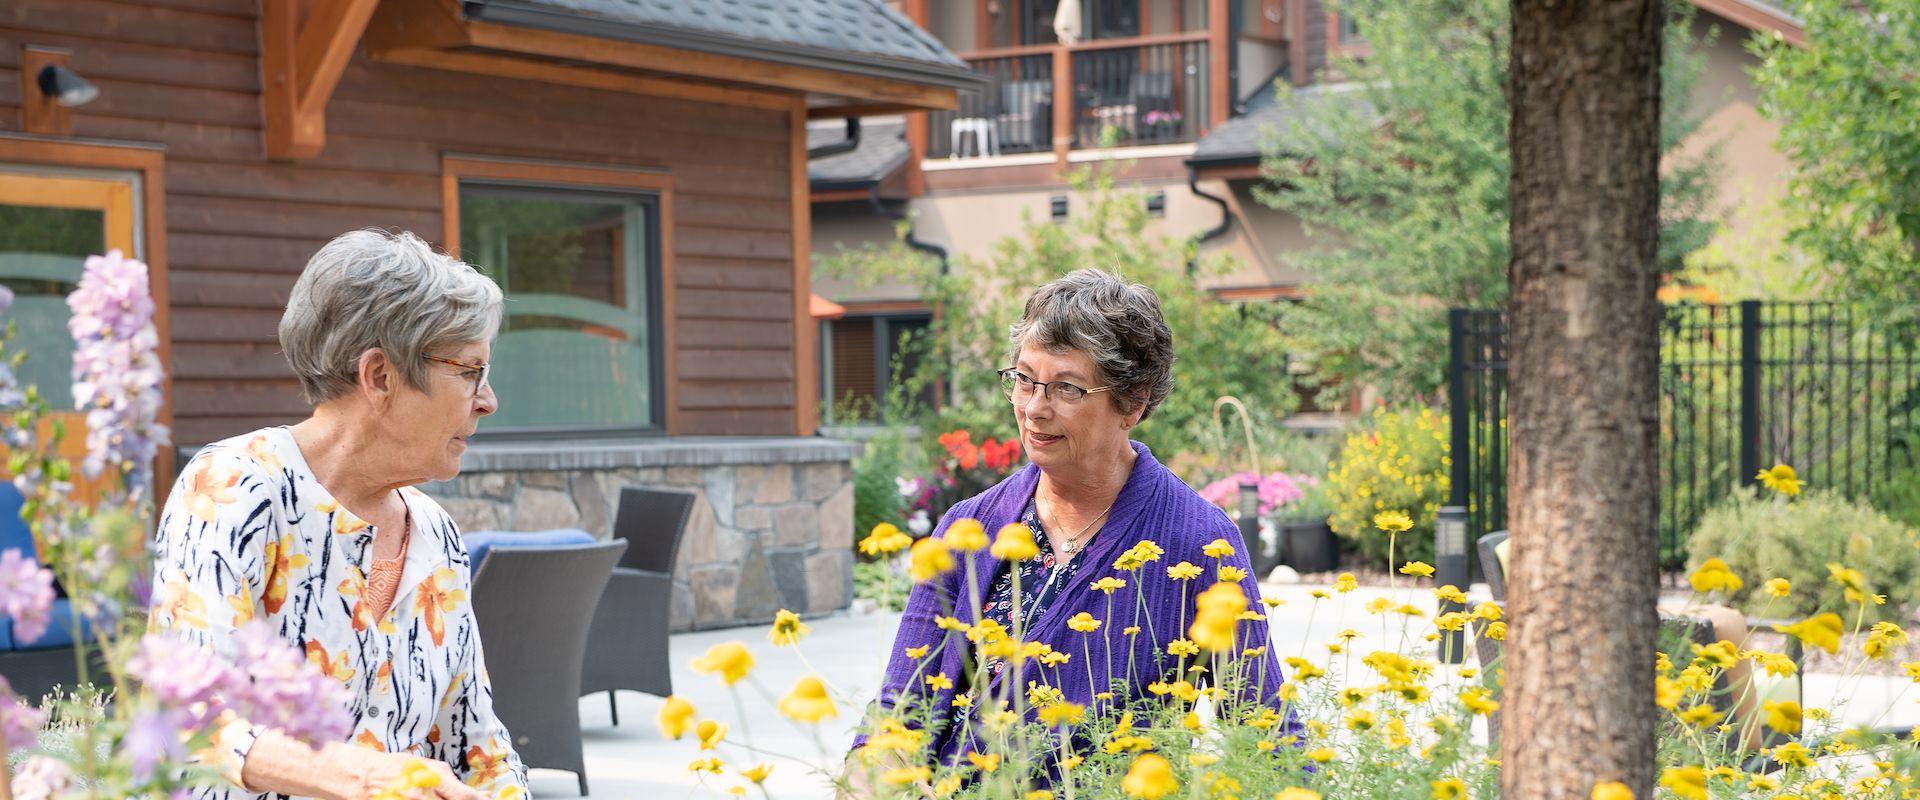 A female senior resident with a white floral shirt and another female senior resident with a purple sweater stand behind bright yellow flowers with vibrant green leaves as they tend to the garden bed in the courtyard.